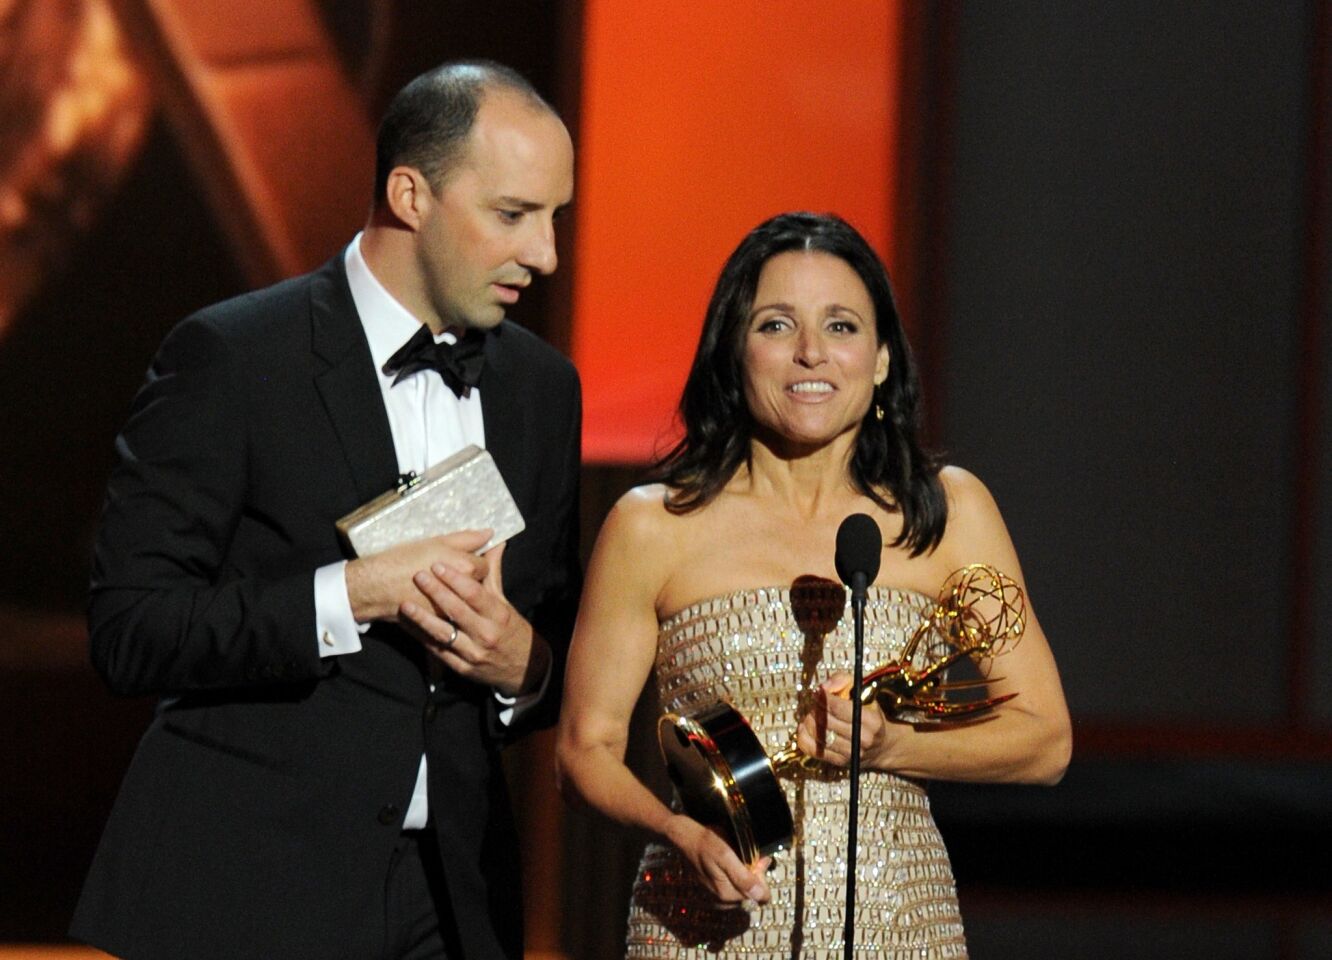 Julia Louis-Dreyfus and Tony Hale carried their characters from "Veep" up on the stage for Dreyfus' win for actress in a comedy series. Hale, who had just won for supporting actor in a comedy series, stood behind, holding her clutch and whispering acceptance speech suggestions, such as "You love them so much." If only more performers brought their characters on stage with them, maybe people wouldn't dread award speeches so much.